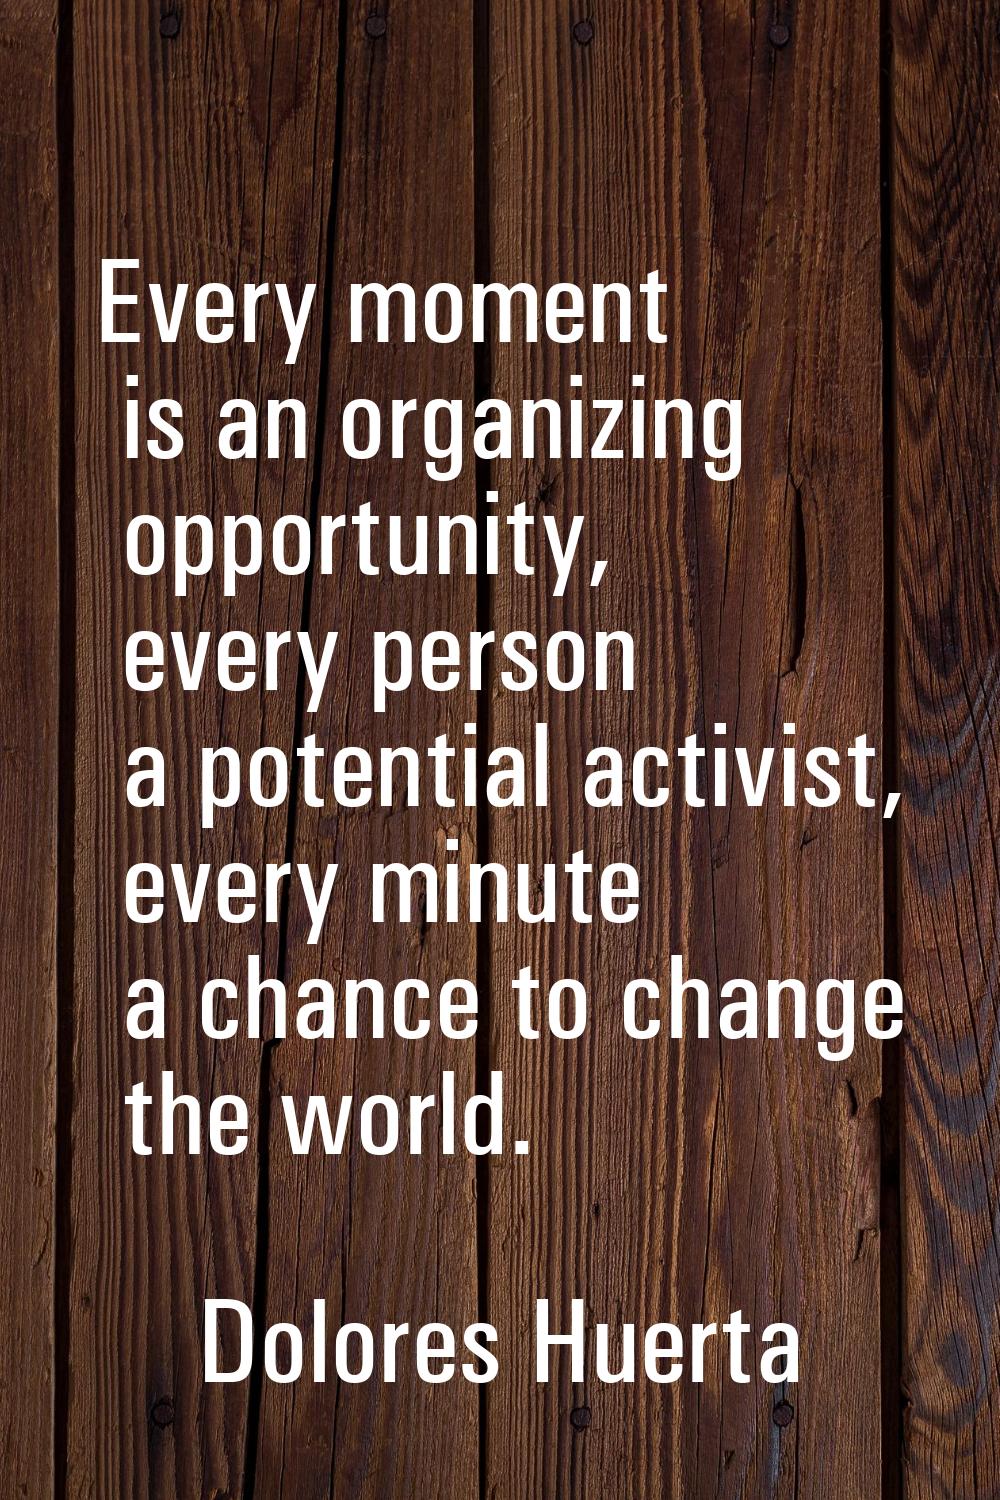 Every moment is an organizing opportunity, every person a potential activist, every minute a chance